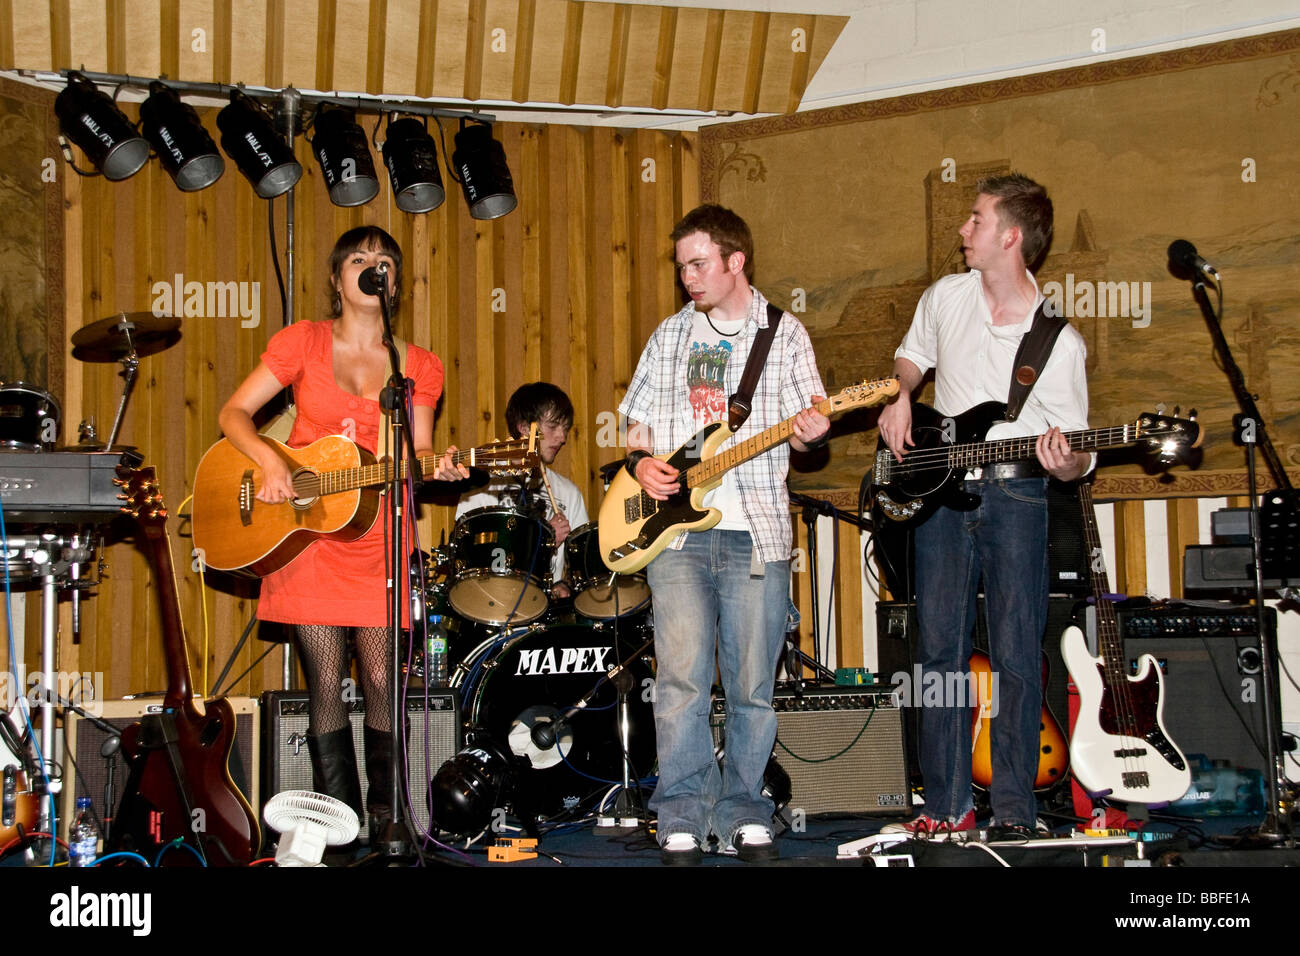 Rocking Cancer with Music 2009 Sarah Gillespie [AKA Coloso] Band playing live at the Bonar Hall in Dundee,UK Stock Photo